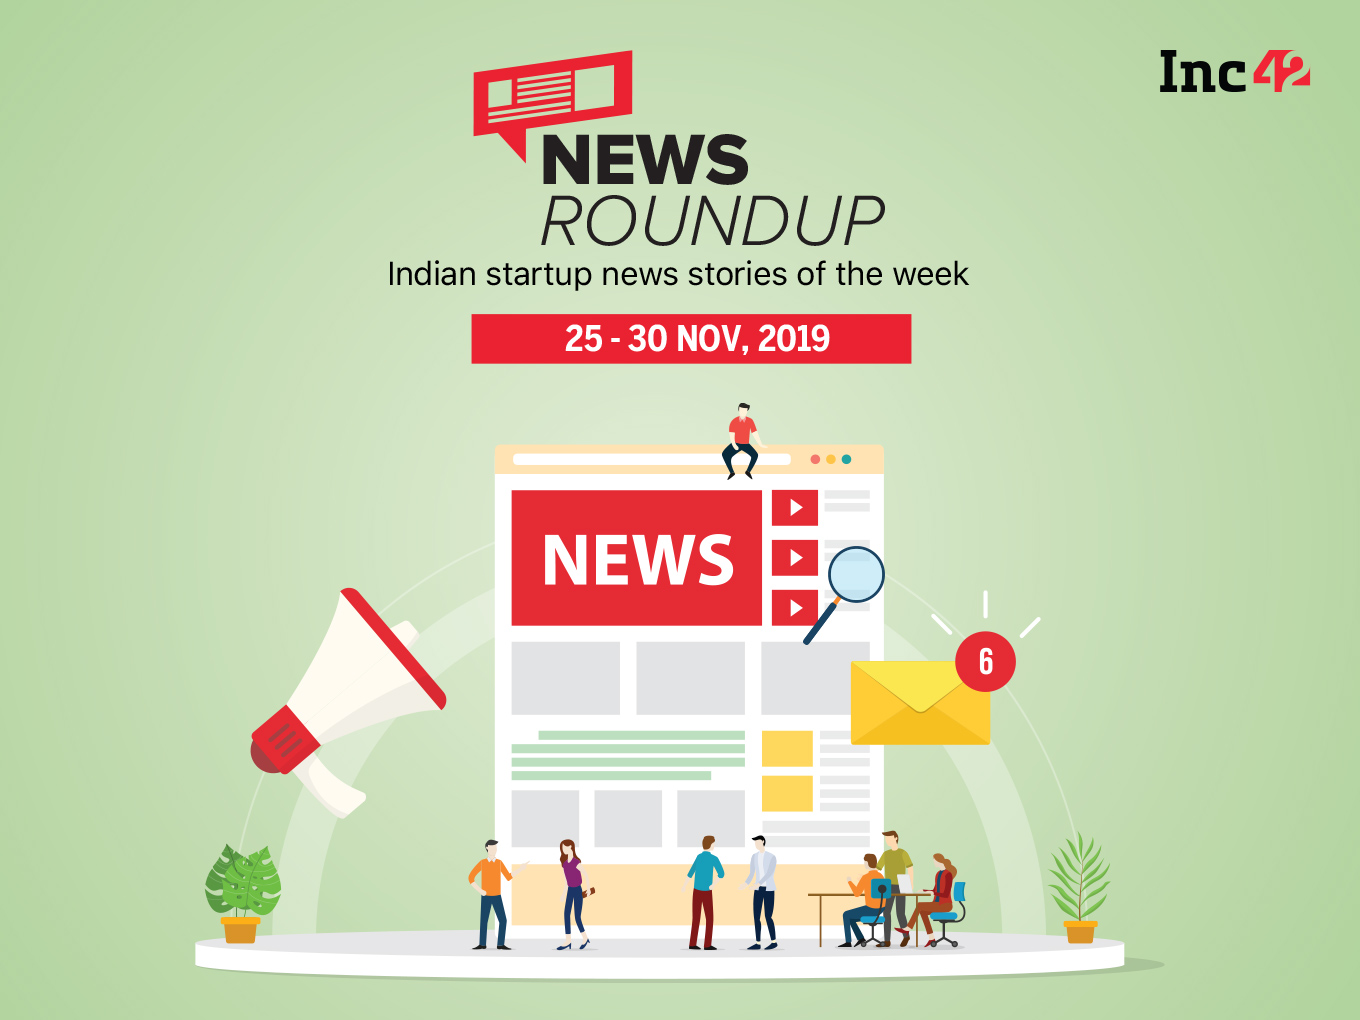 News Roundup: 11 Indian Startup News Stories You Don’t Want To Miss This Week [Nov 25 - 30]